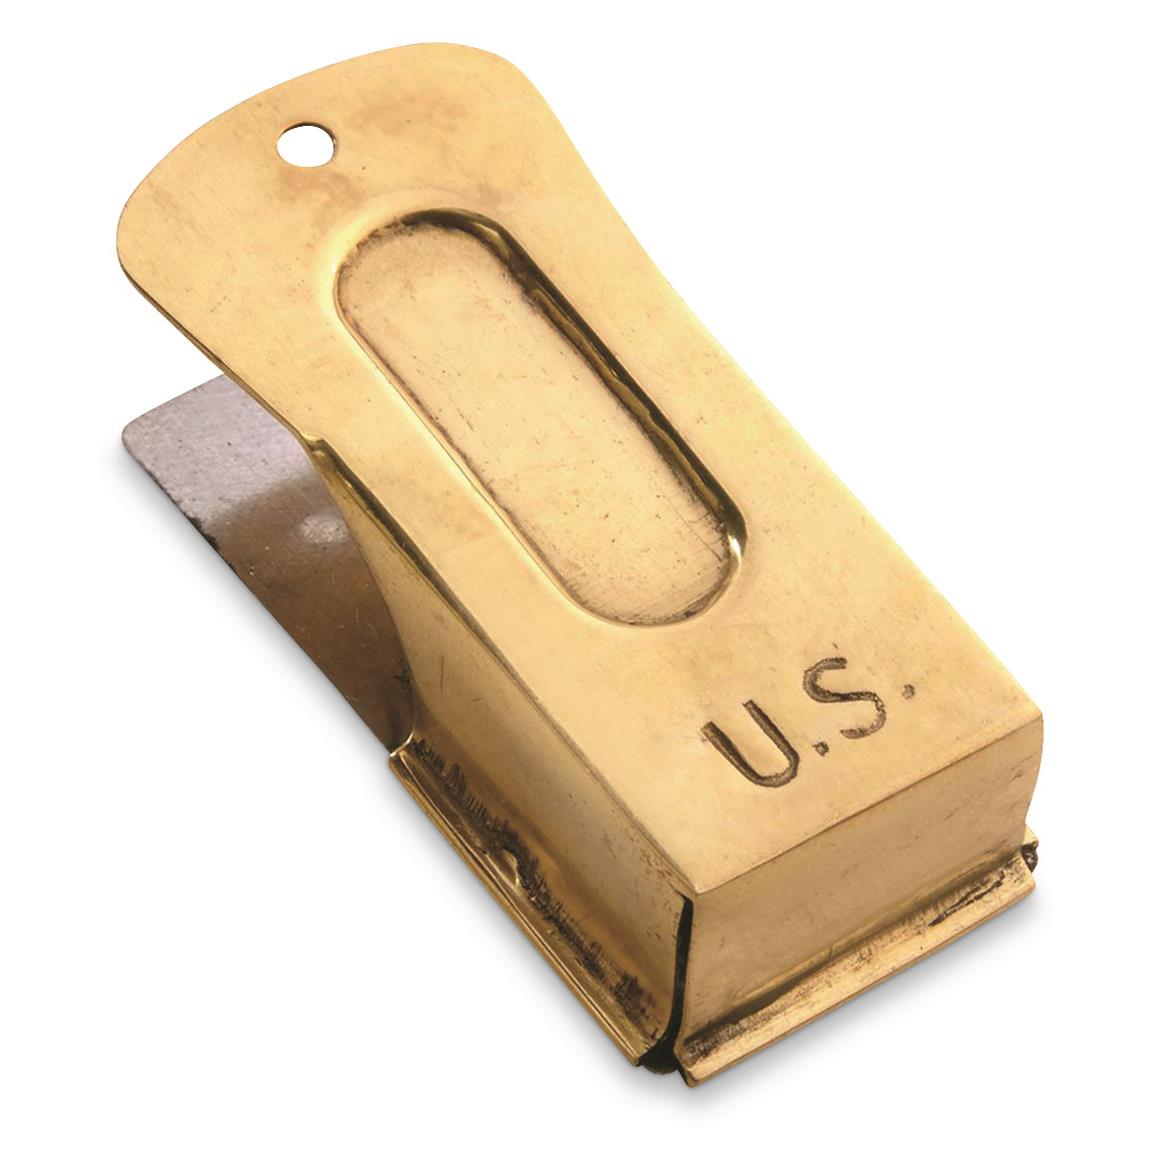 U.S. Military D-Day Cricket Clicker, Reproduction